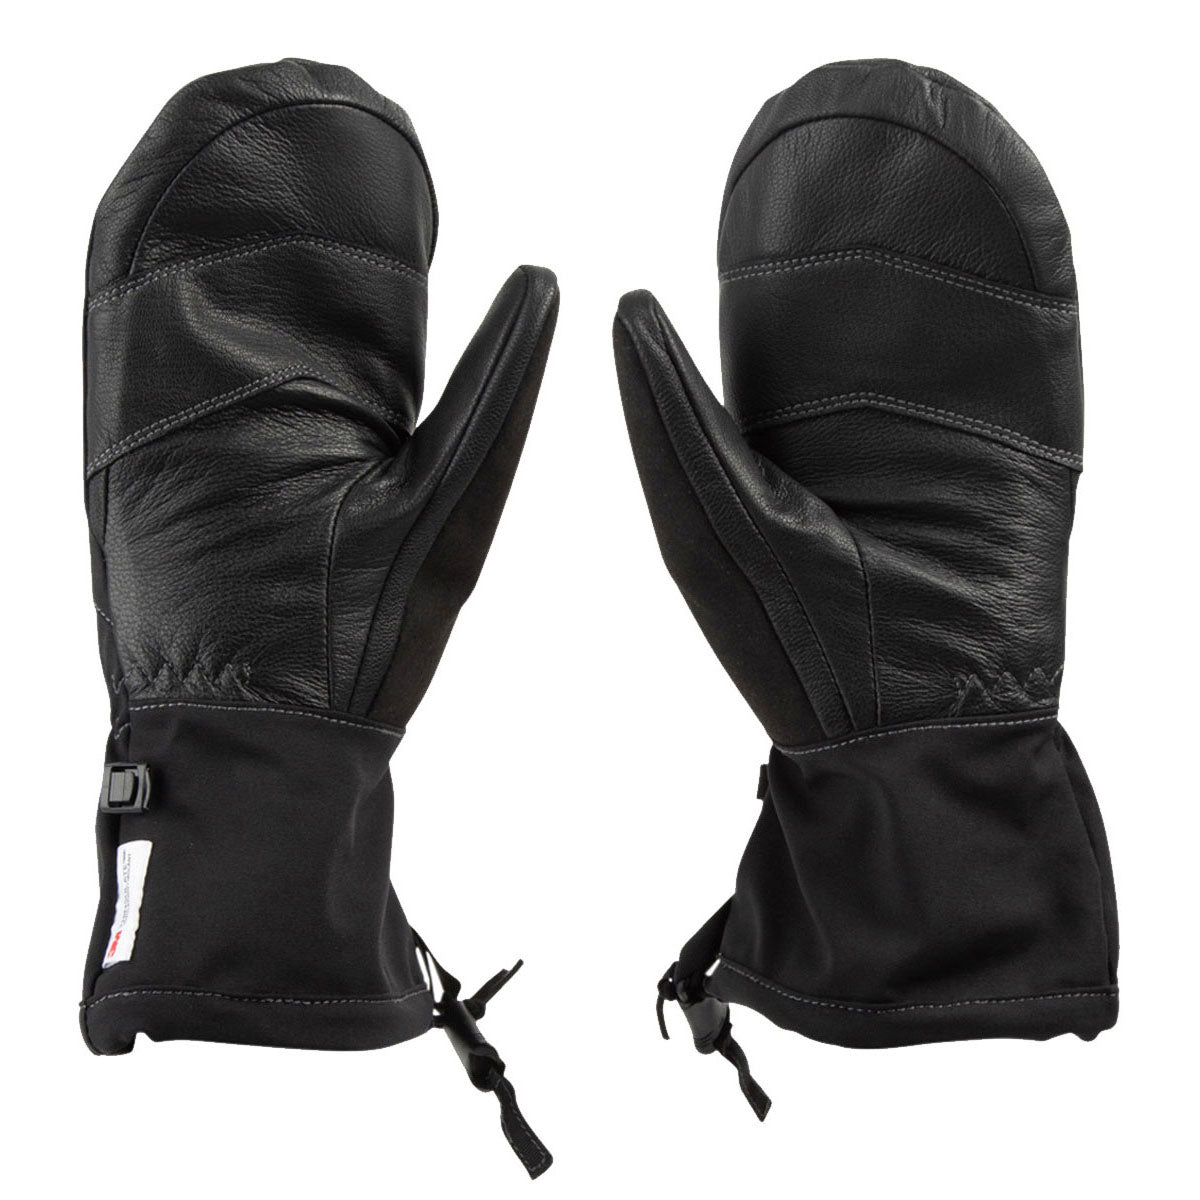 509 Youth Rocco Gauntlet Mittens